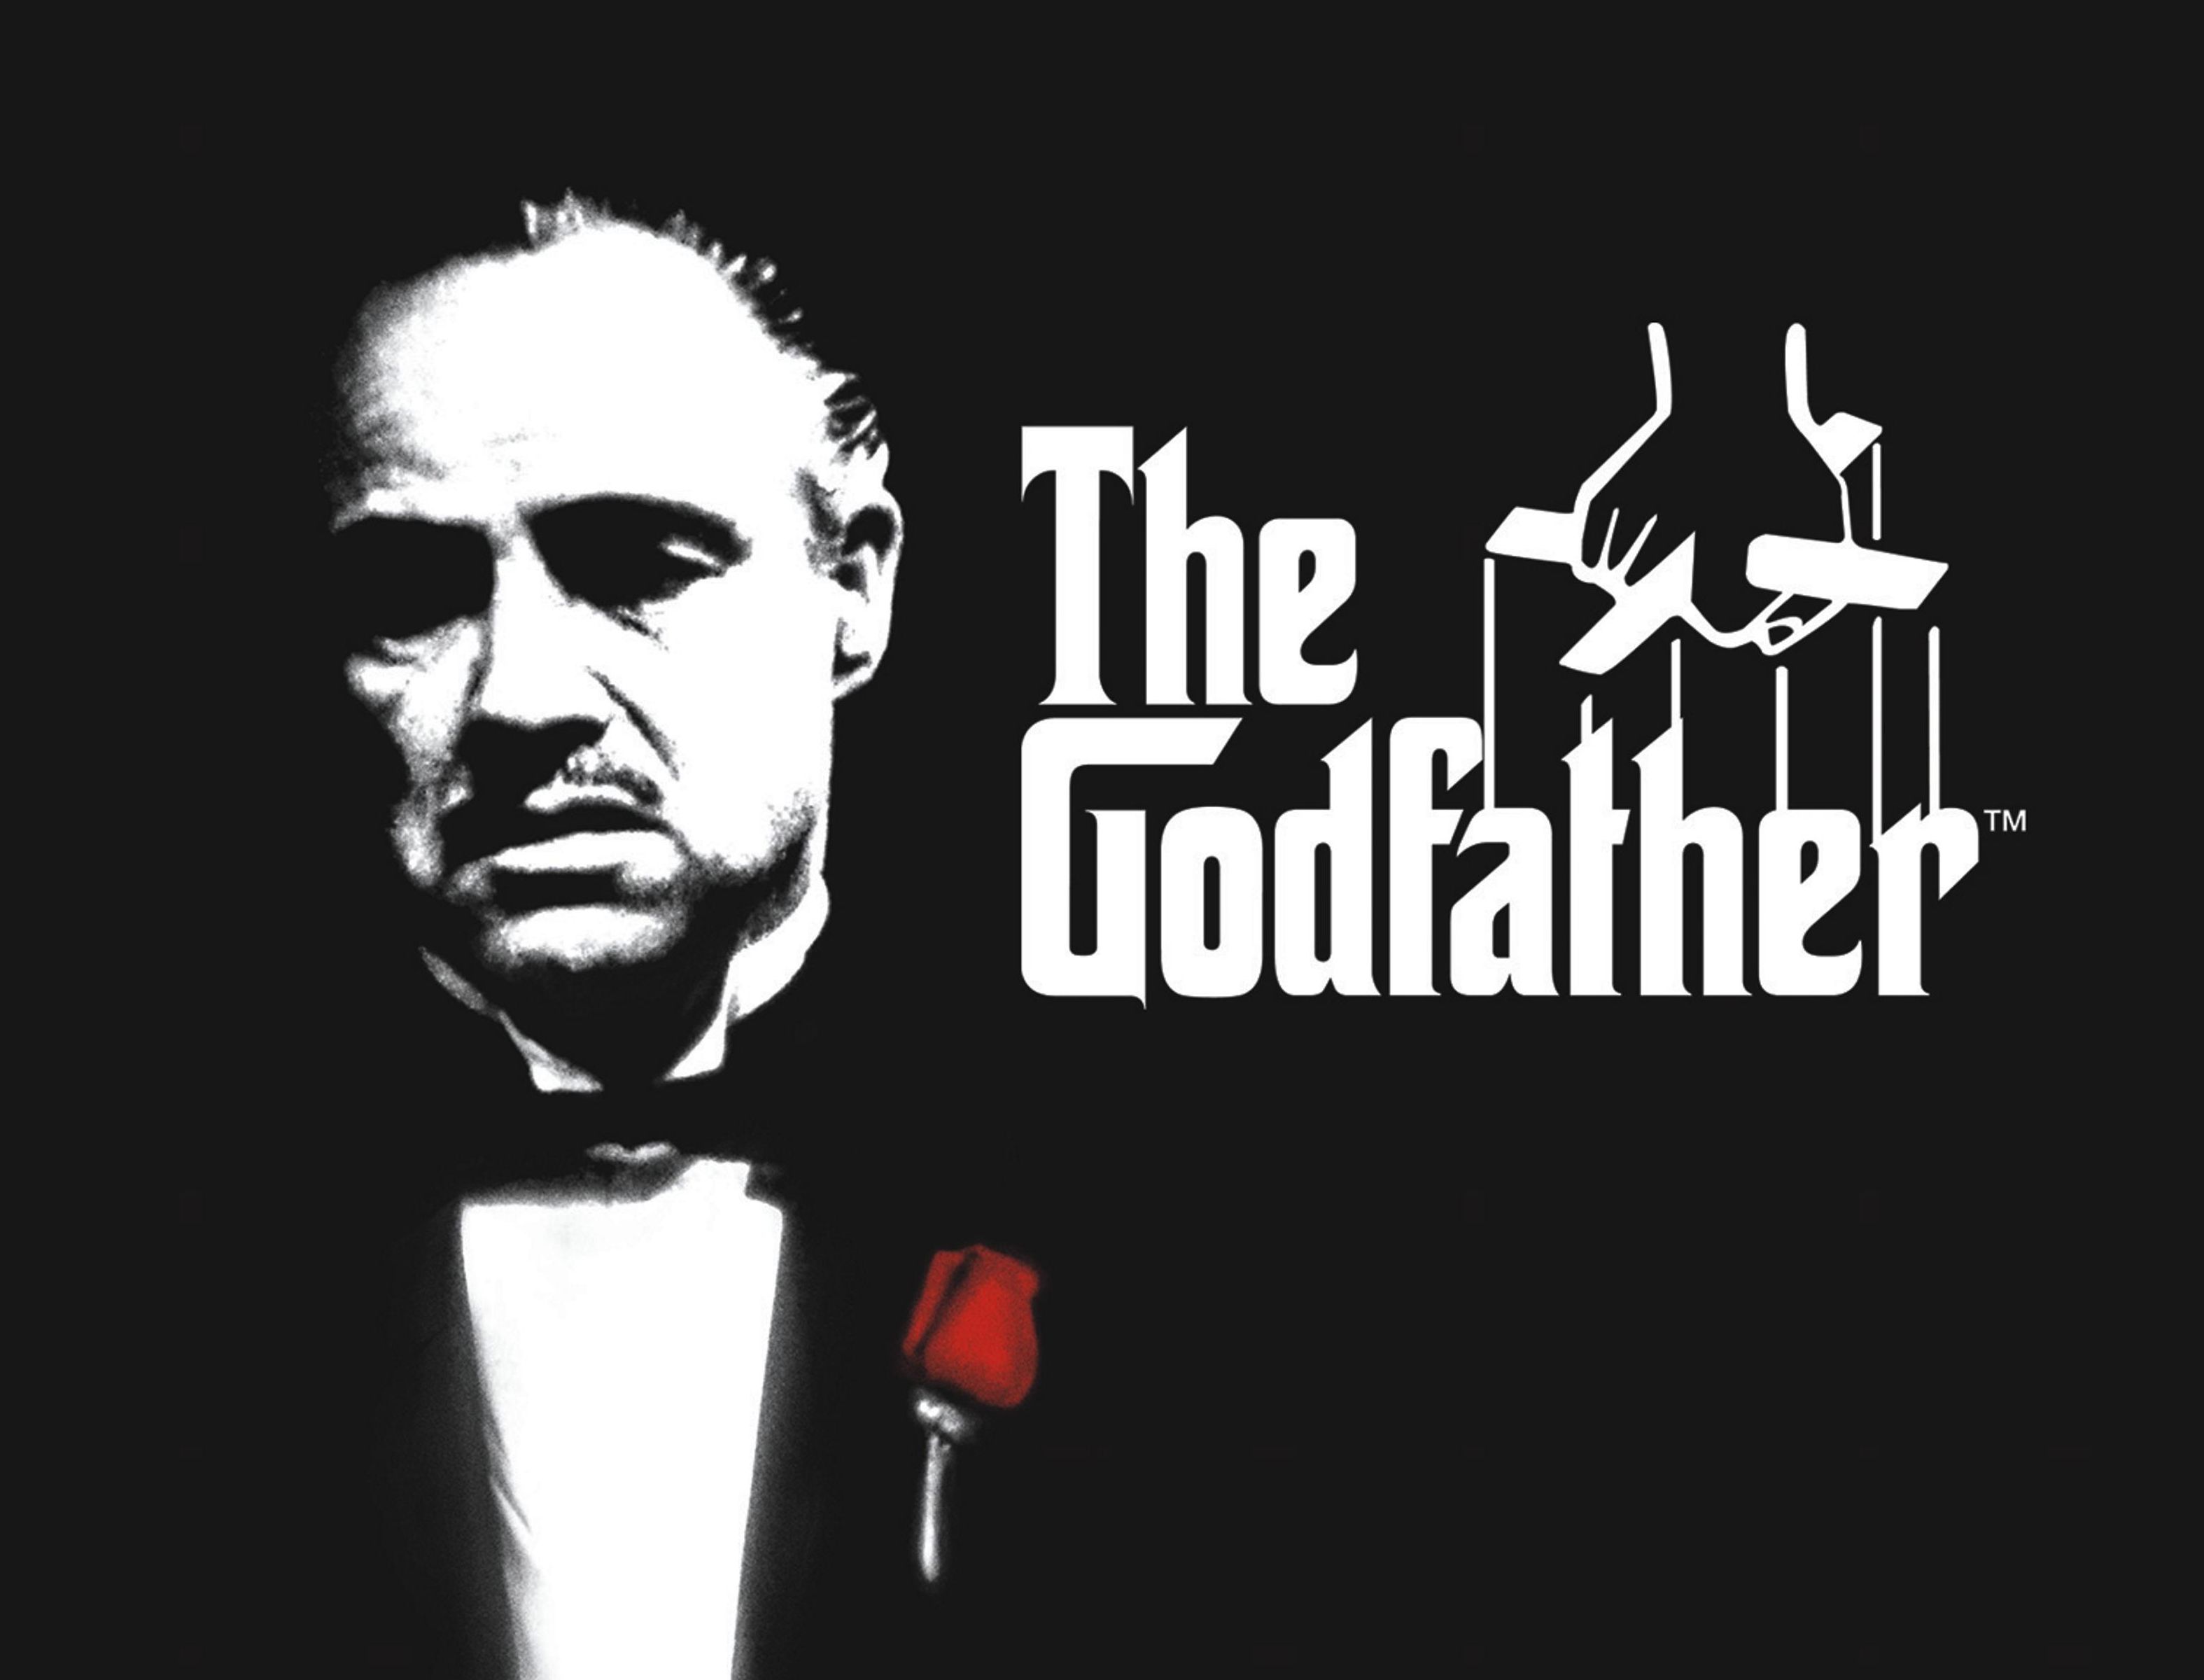 The Godfather Black and White poster